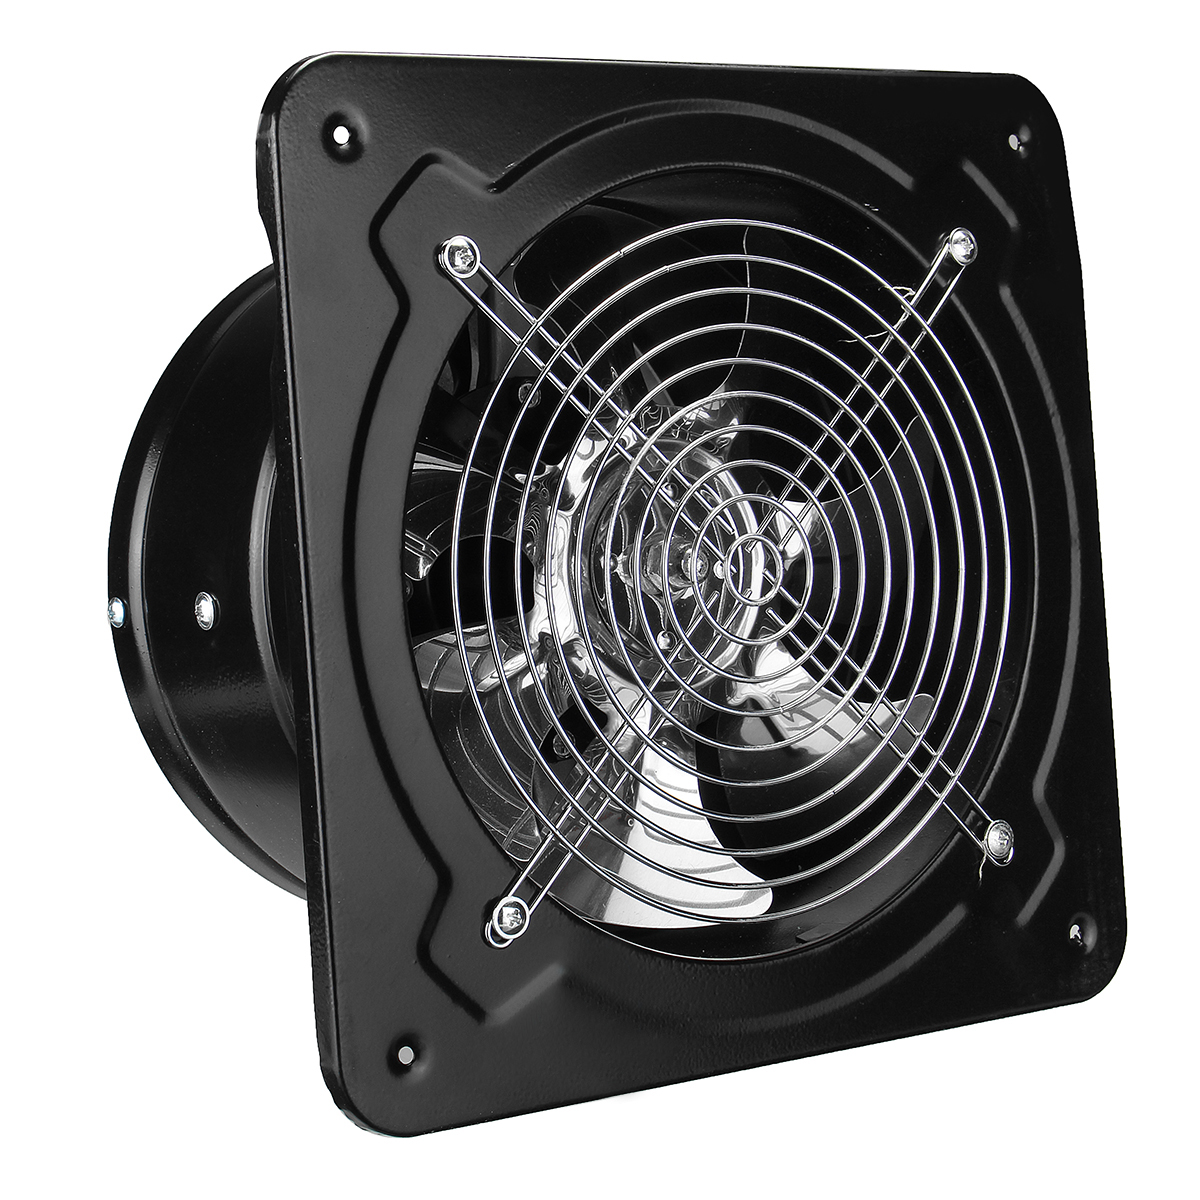 

60W/80W/150W Industrial Ventilation Extractor Axial Exhaust Commercial Air Blower Fan